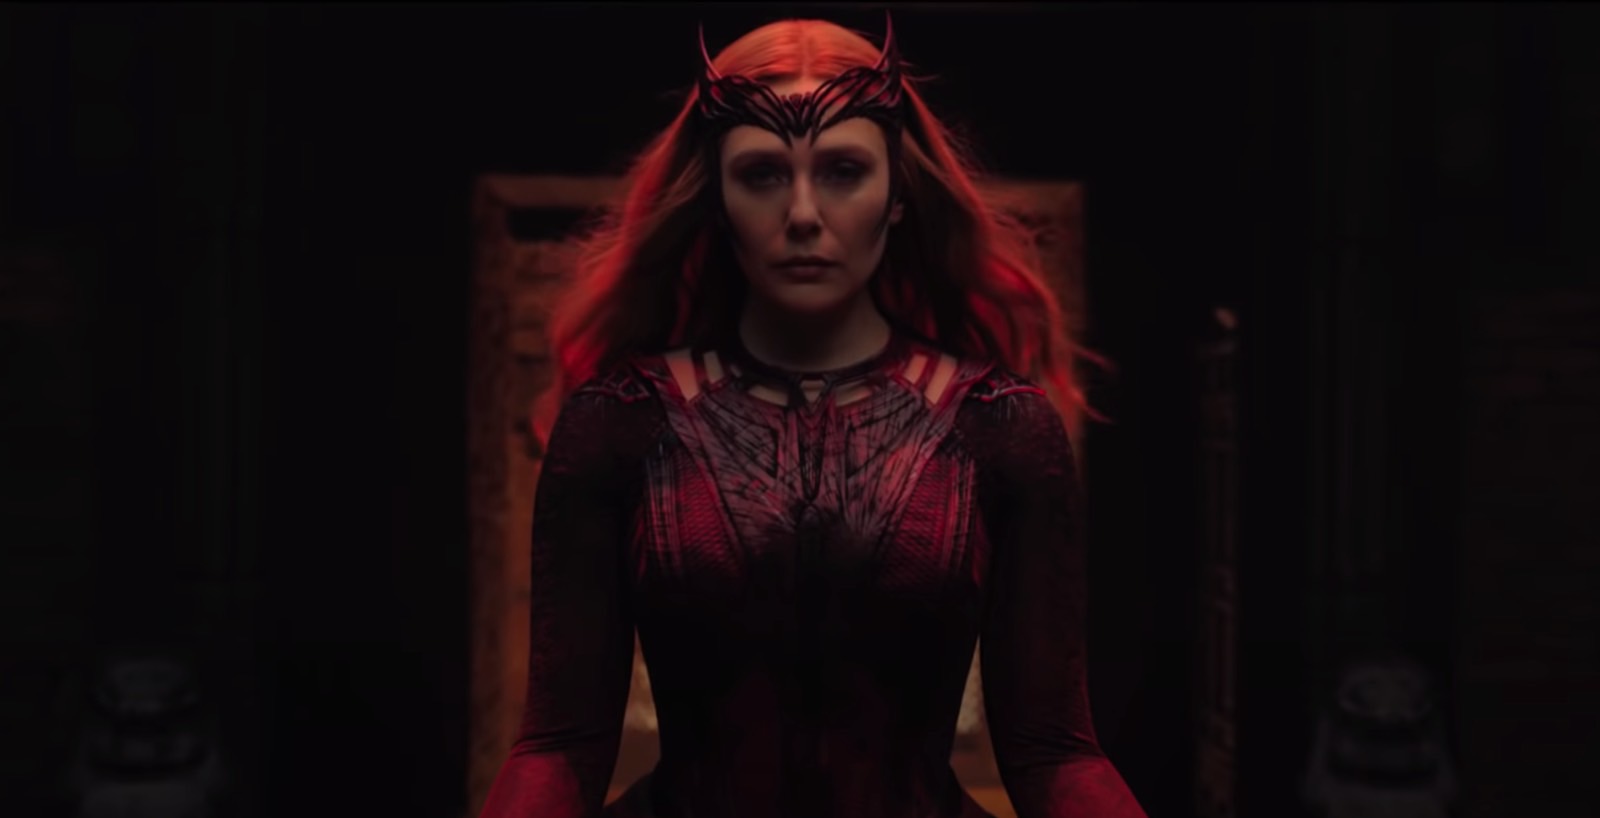 The Scarlet Witch in Doctor Strange 2 trailer